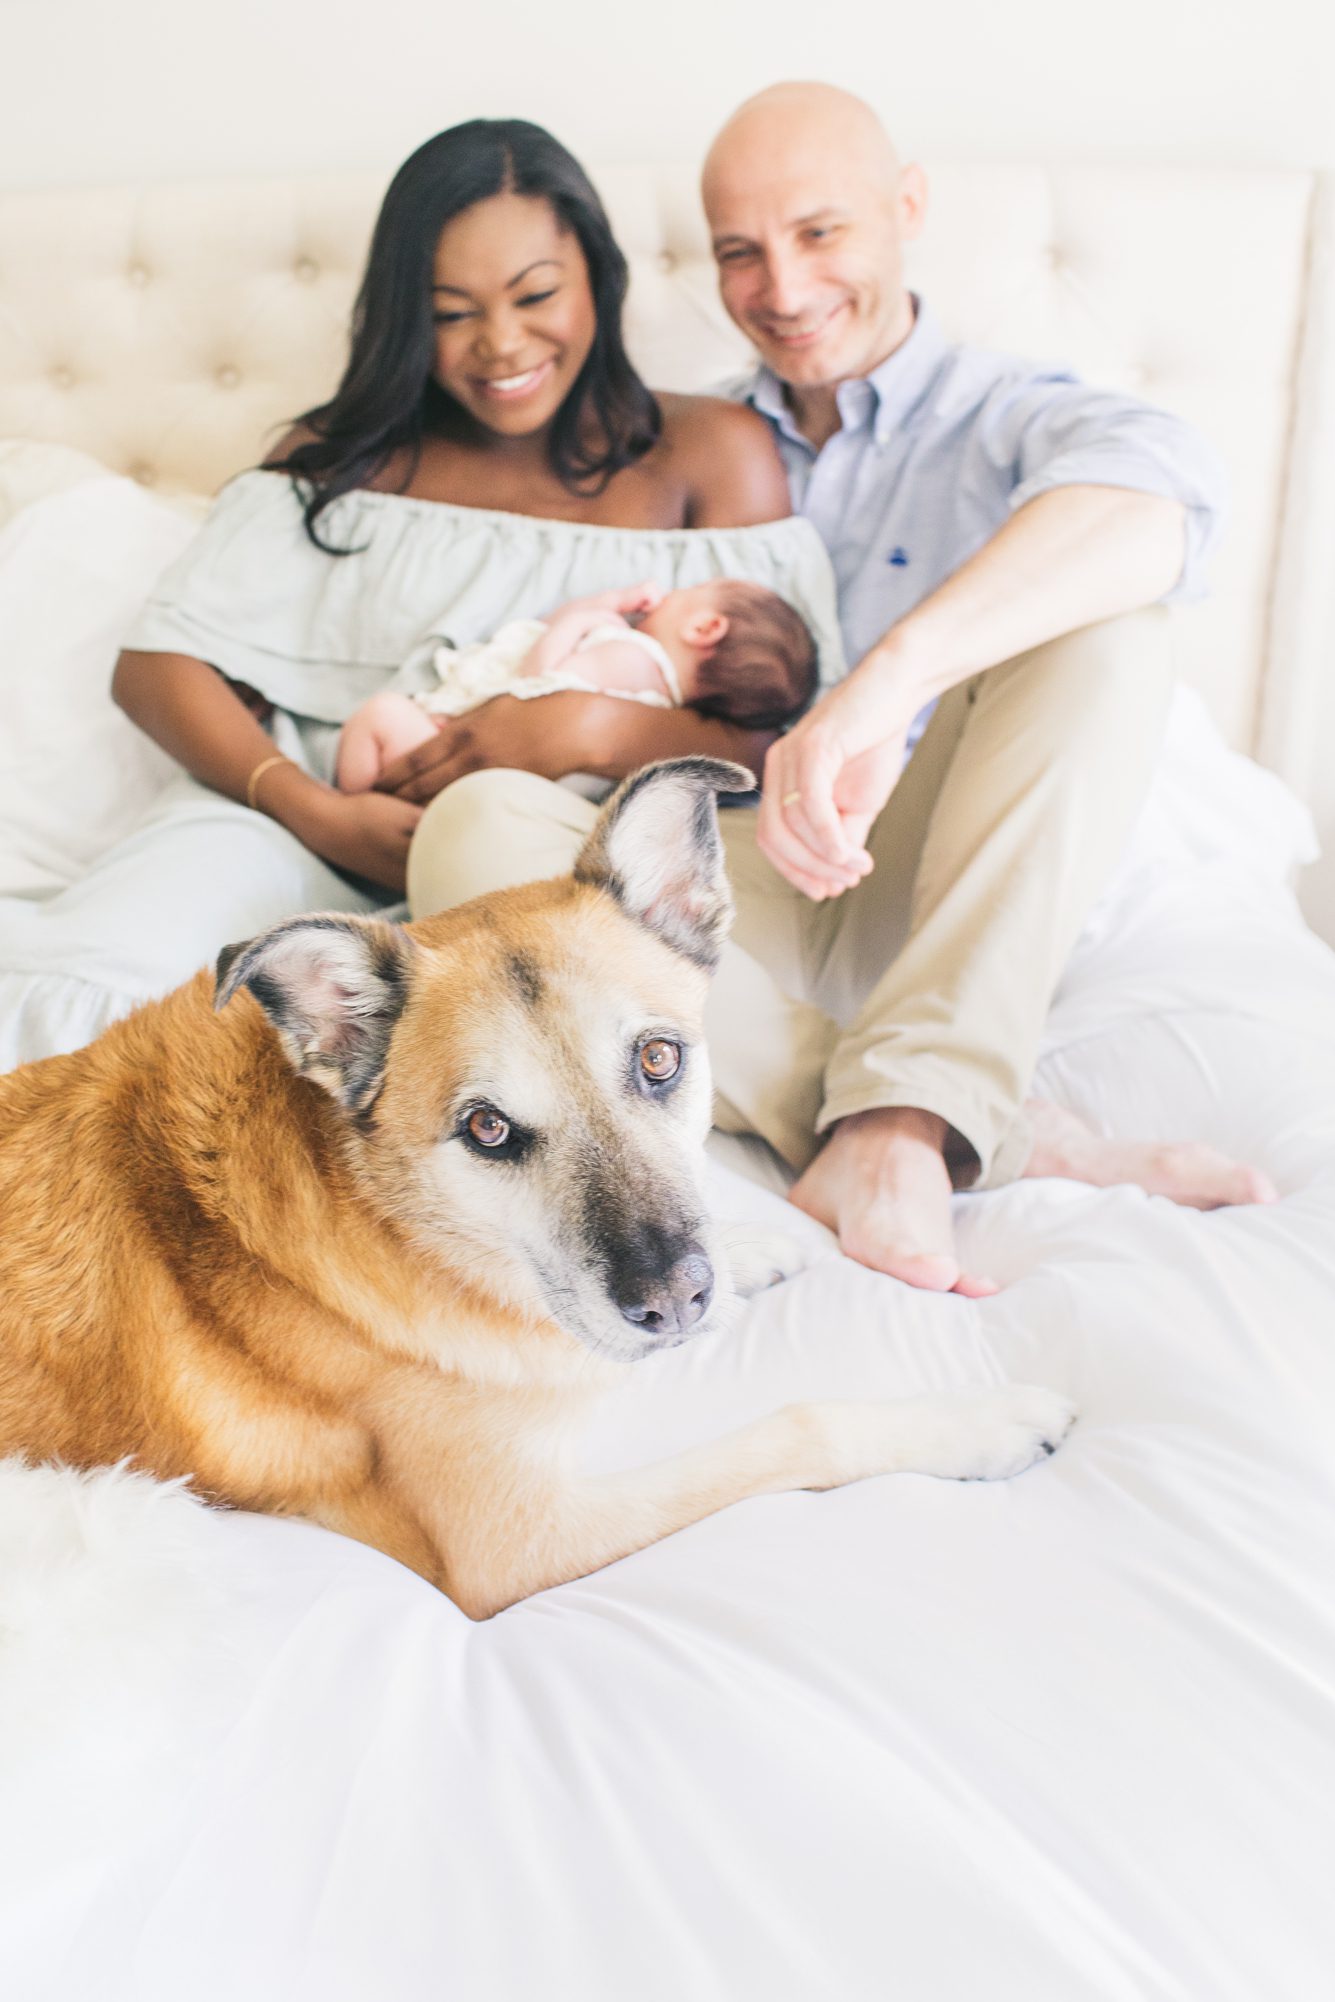 New parents smiling on bed while holding baby and looking at family dog. Photo by LRG Portraits.